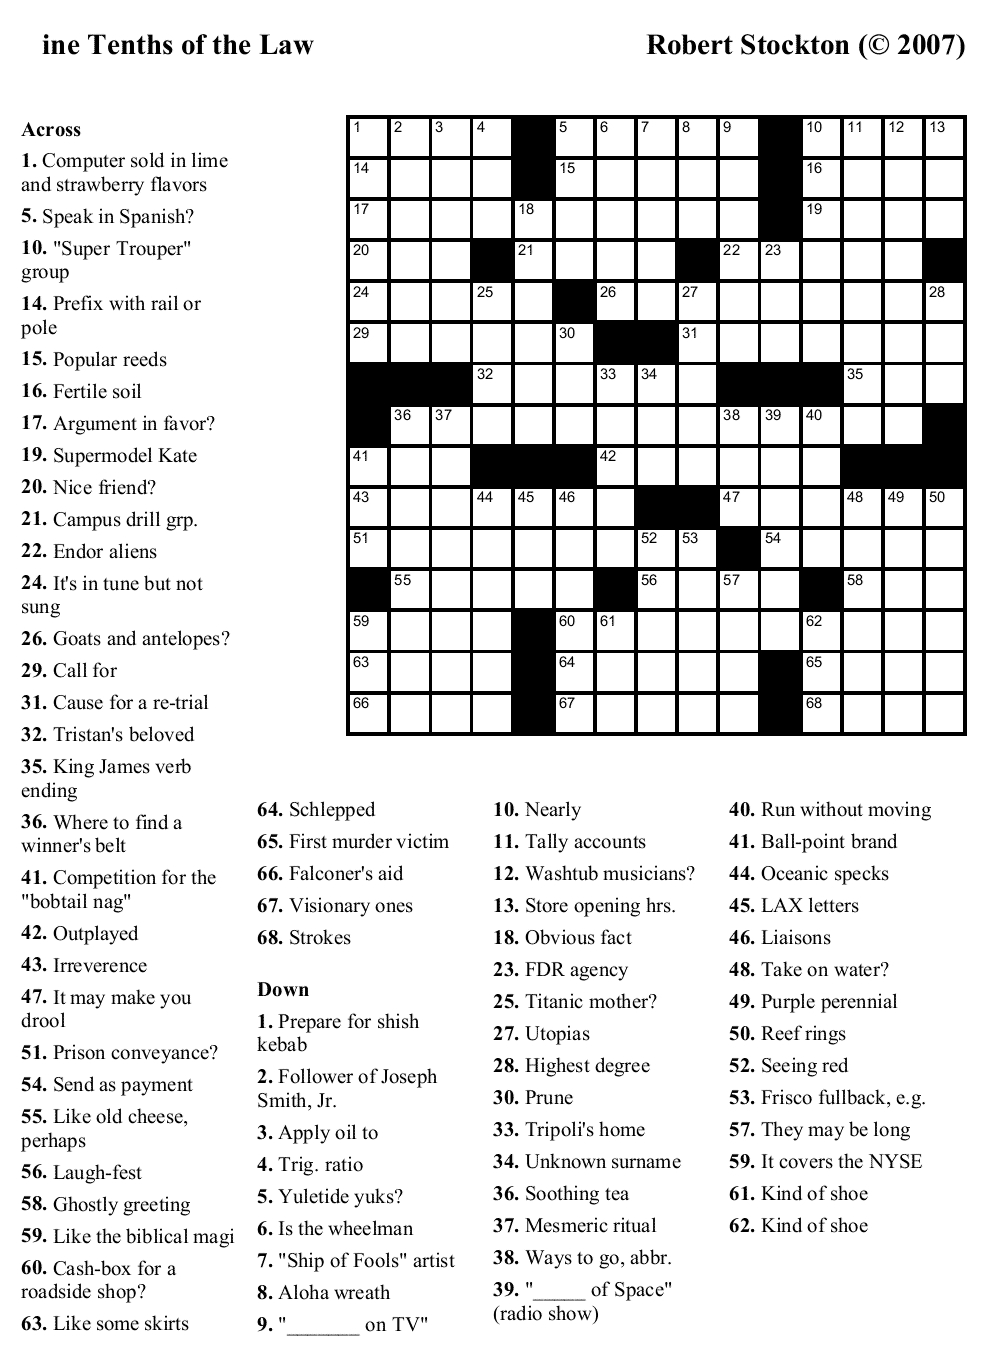 Crossword Puzzles Printable - Yahoo Image Search Results | Crossword - Printable Crossword P